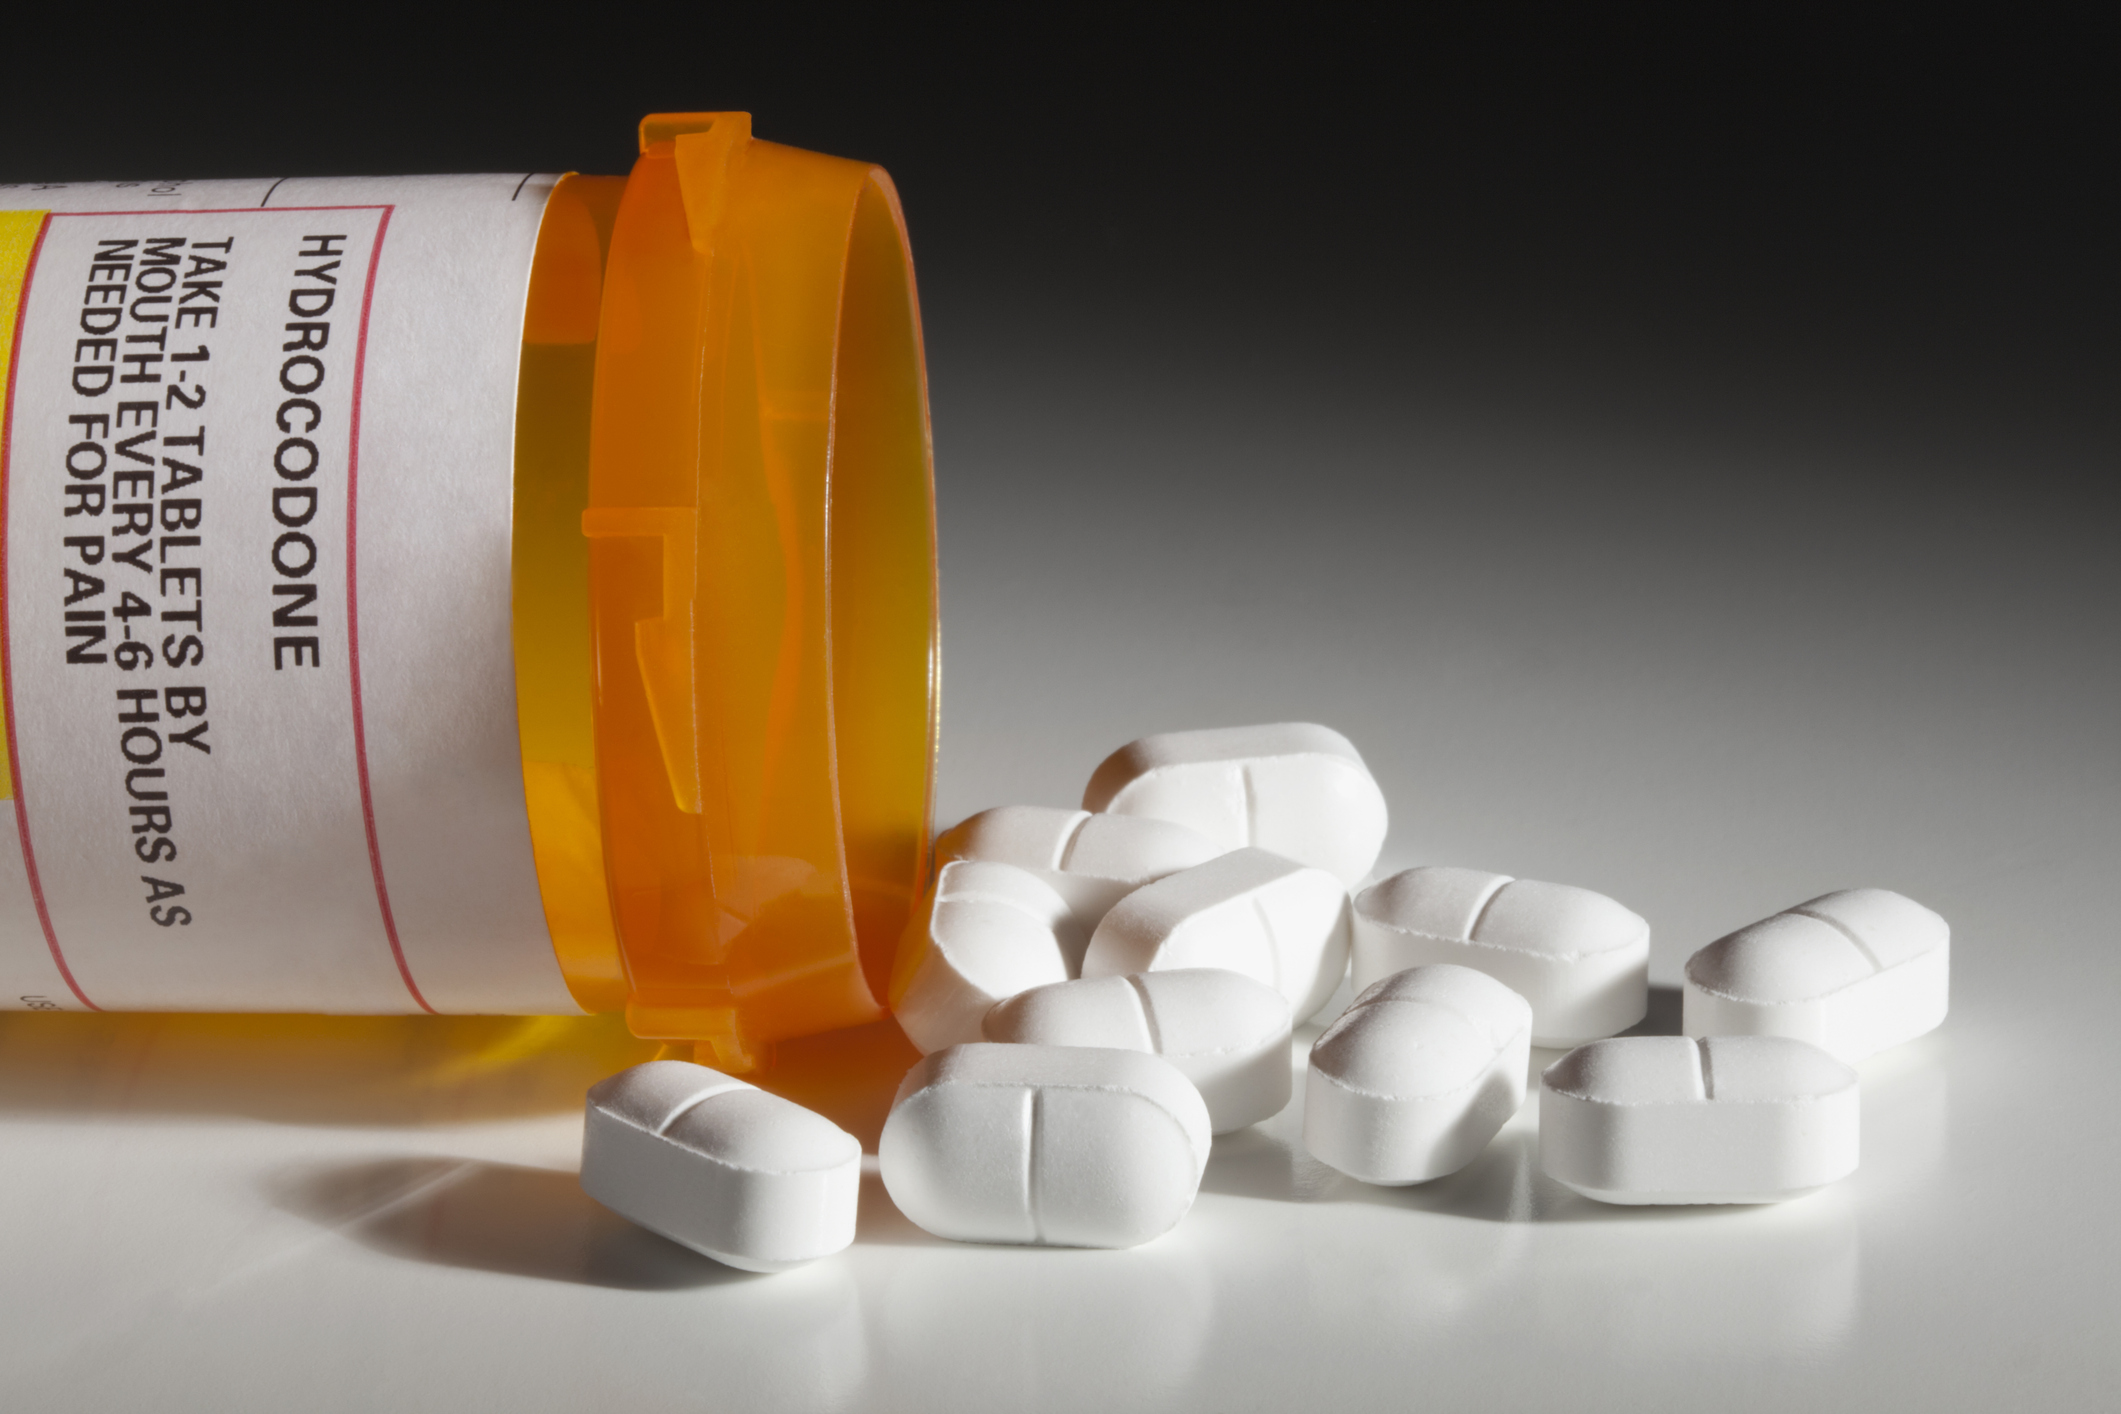 With A 10 Day Supply Of Opioids 1 In 5 Become Long Term Users Ars Technica